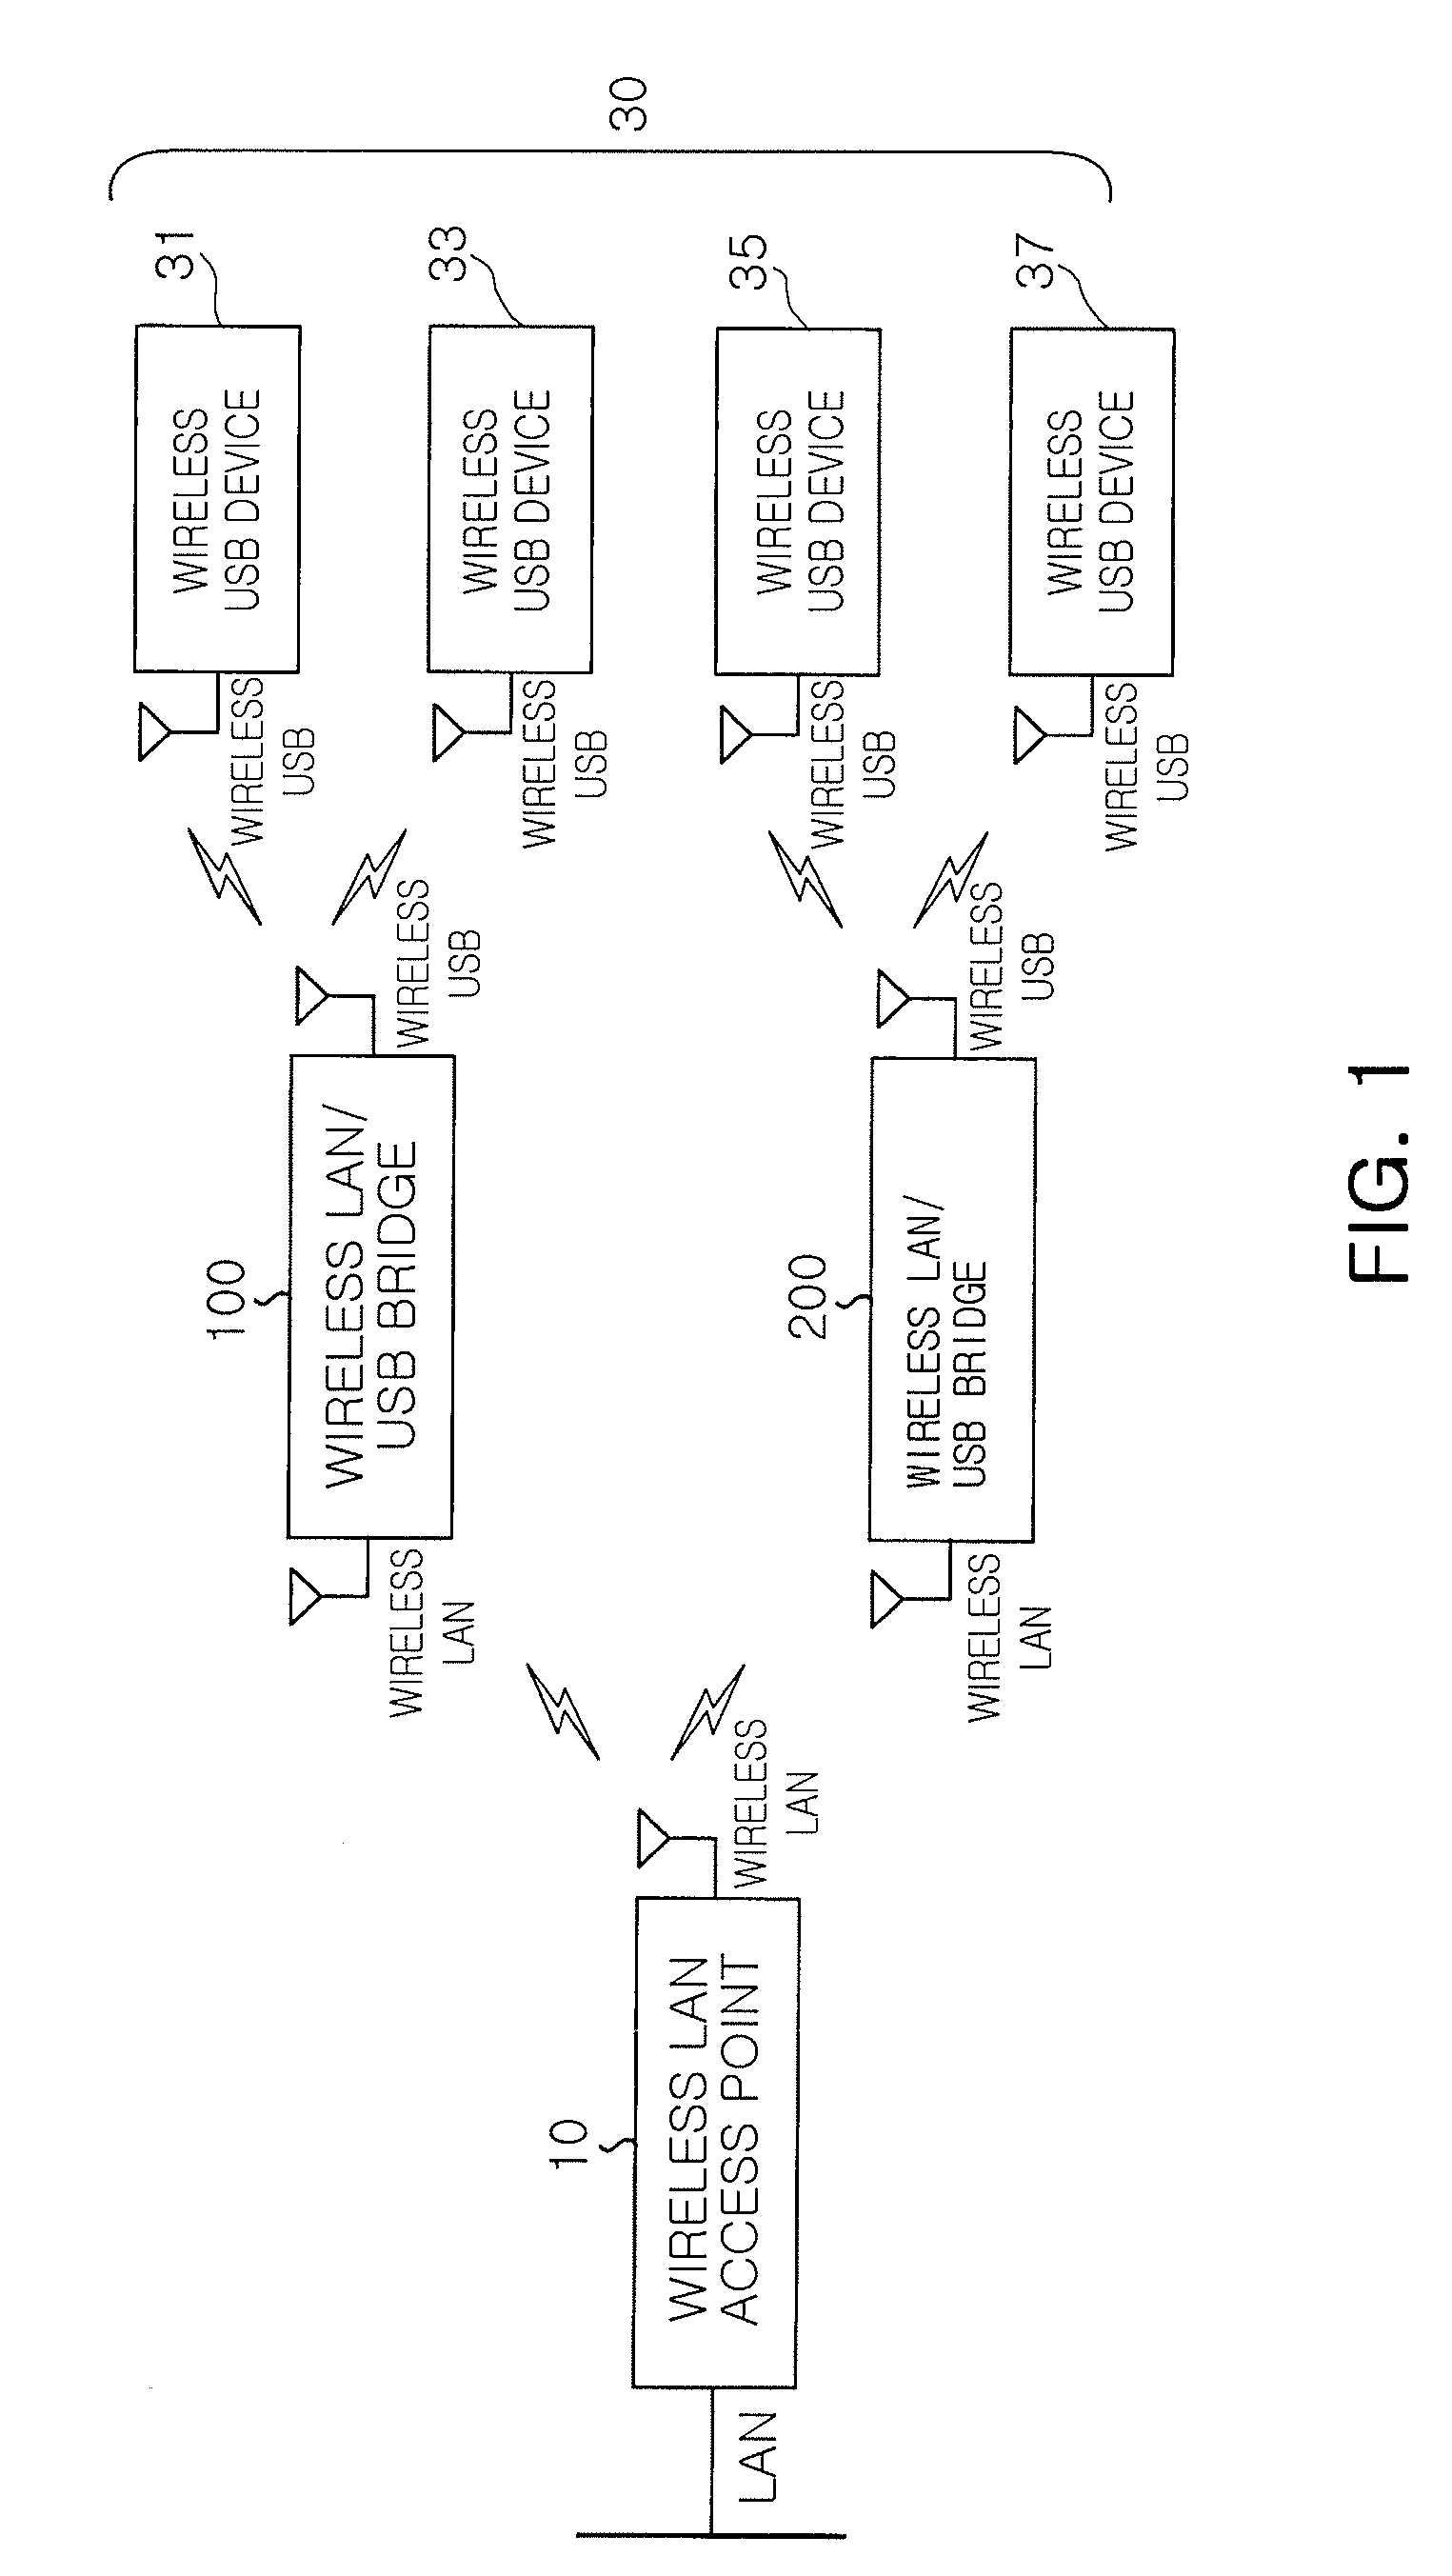 Wireless LAN and USB bridging apparatus for connecting communication between wireless local area network and wireless USB network